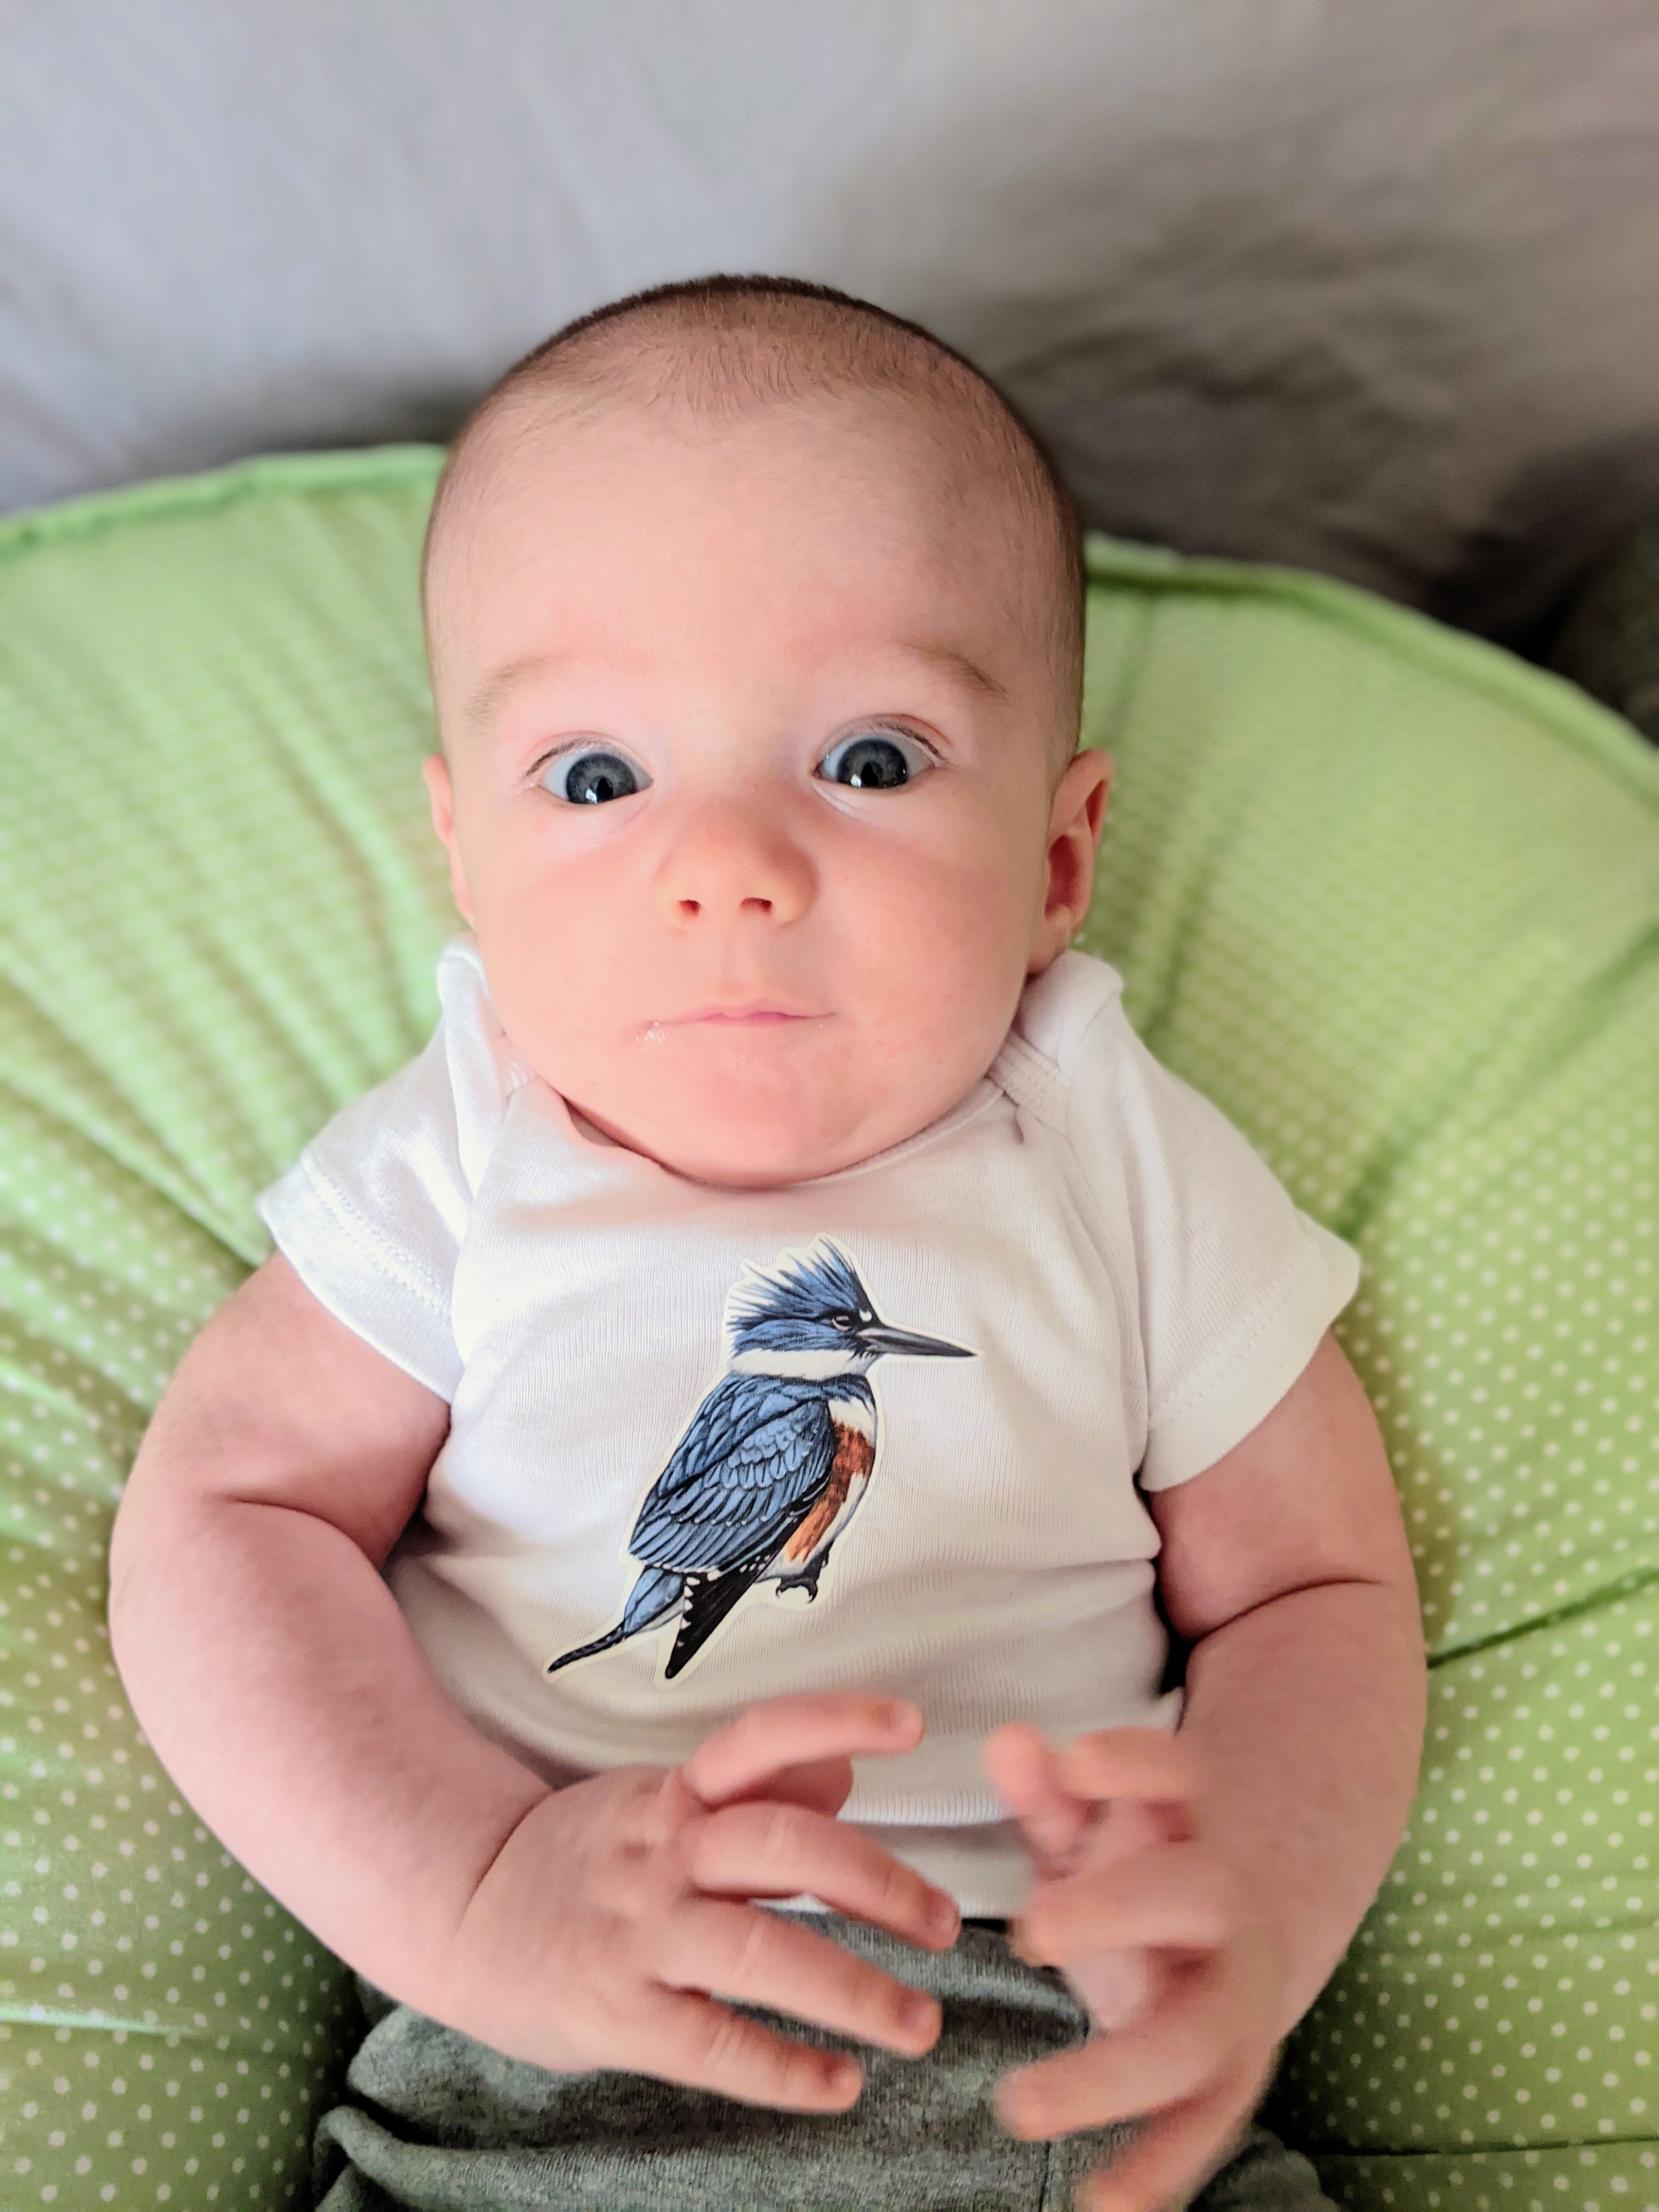 a three month old baby wearing a shirt with a bird on it looks up at the camera